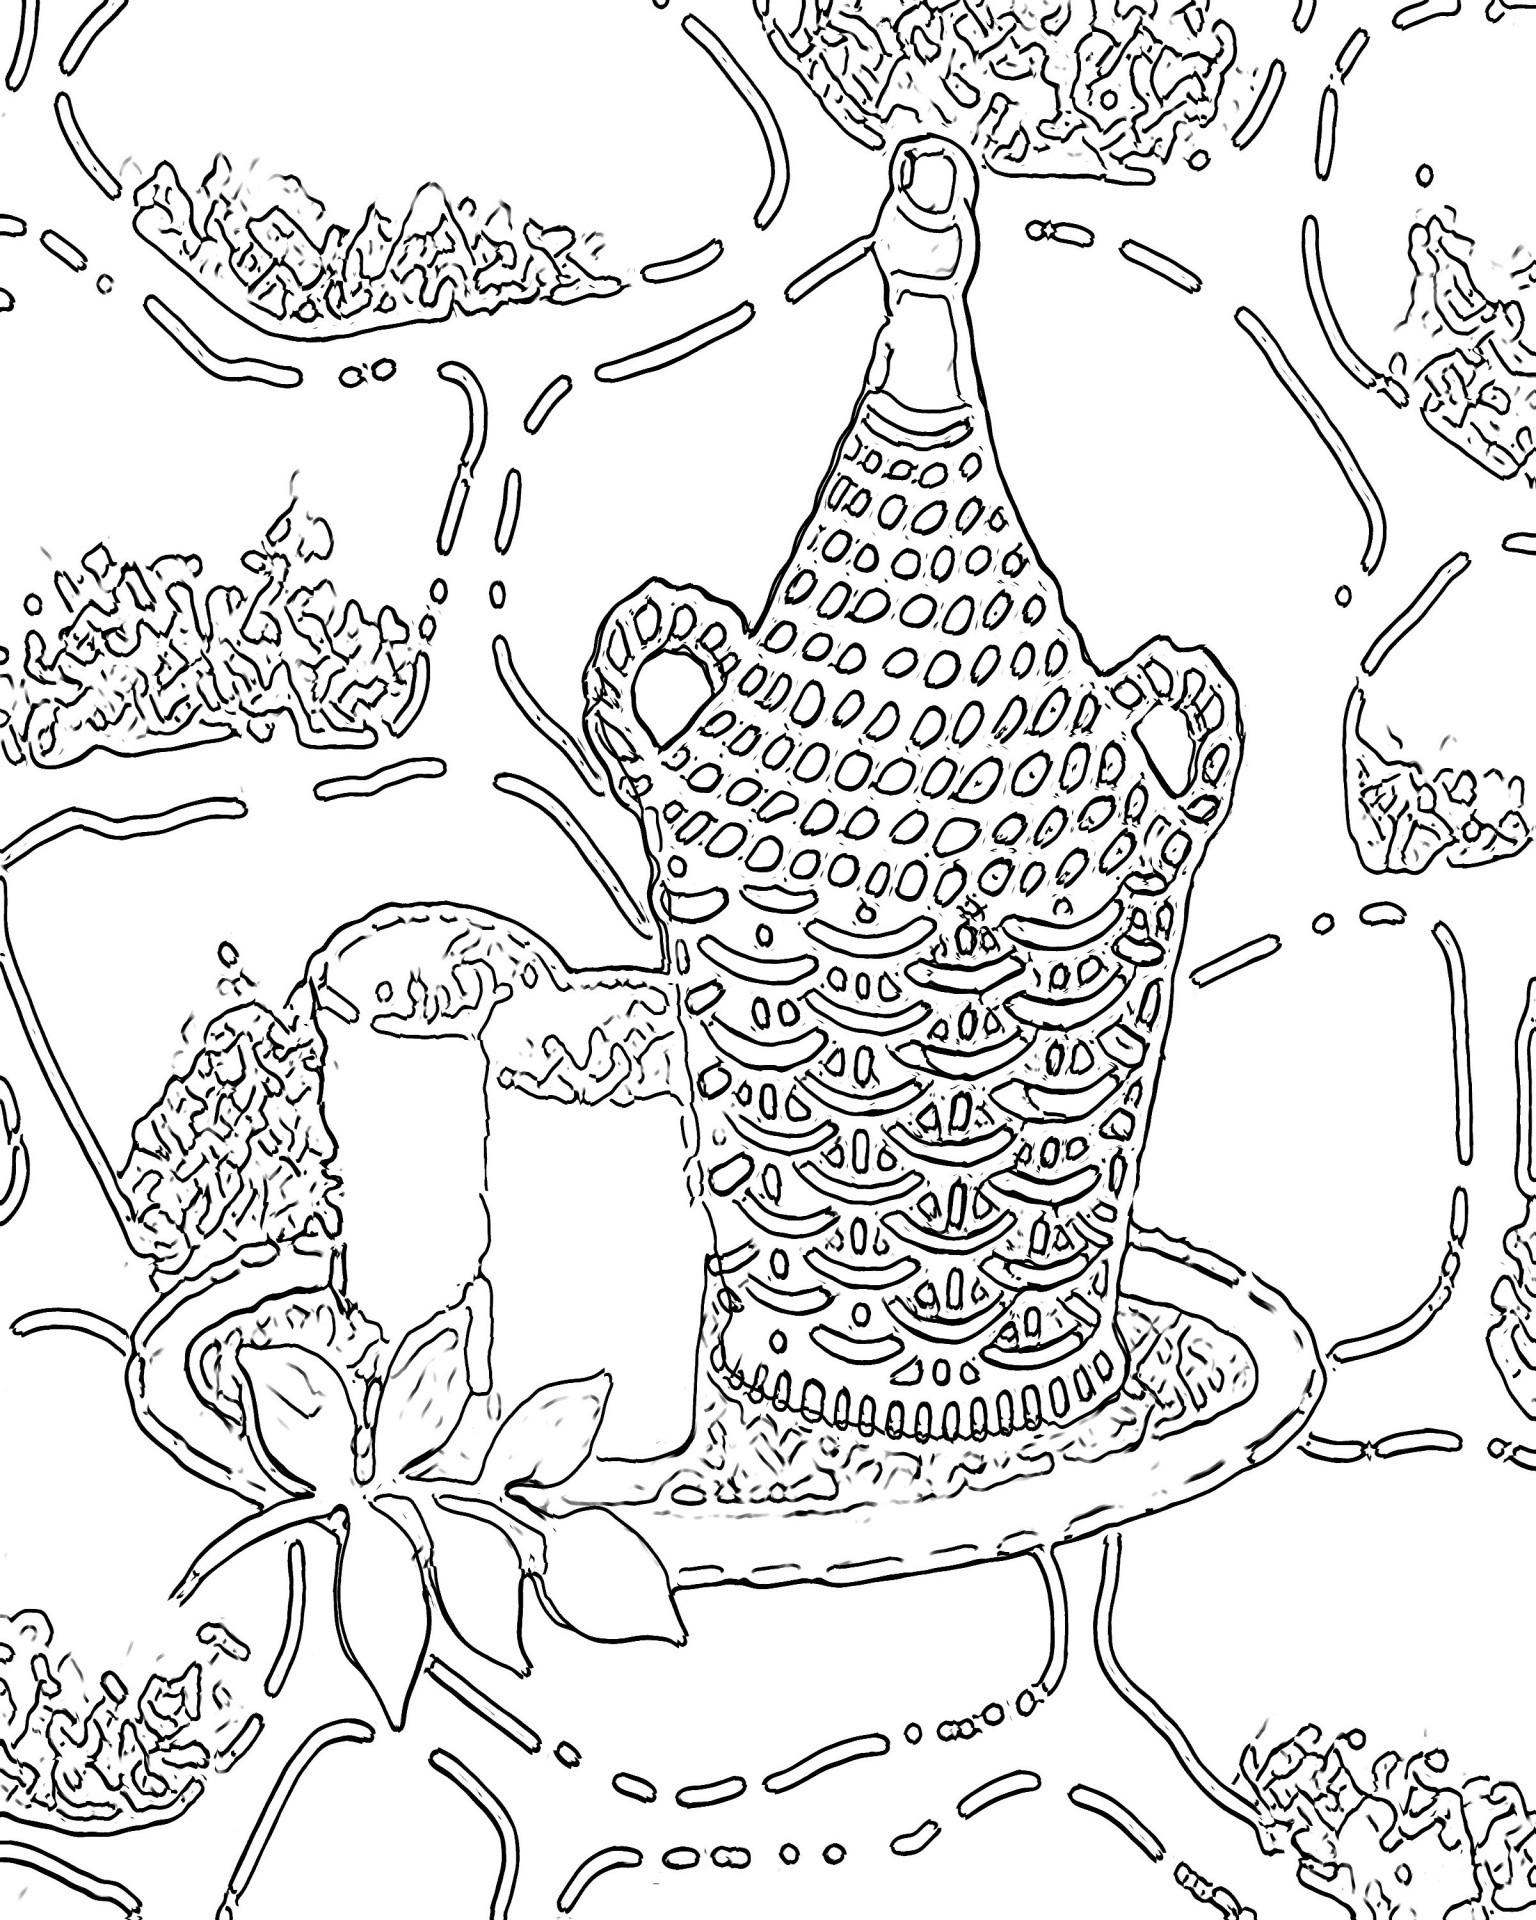 Printable Coloring Pages For Adults
 Free Printable Nature Coloring Pages For Adults at